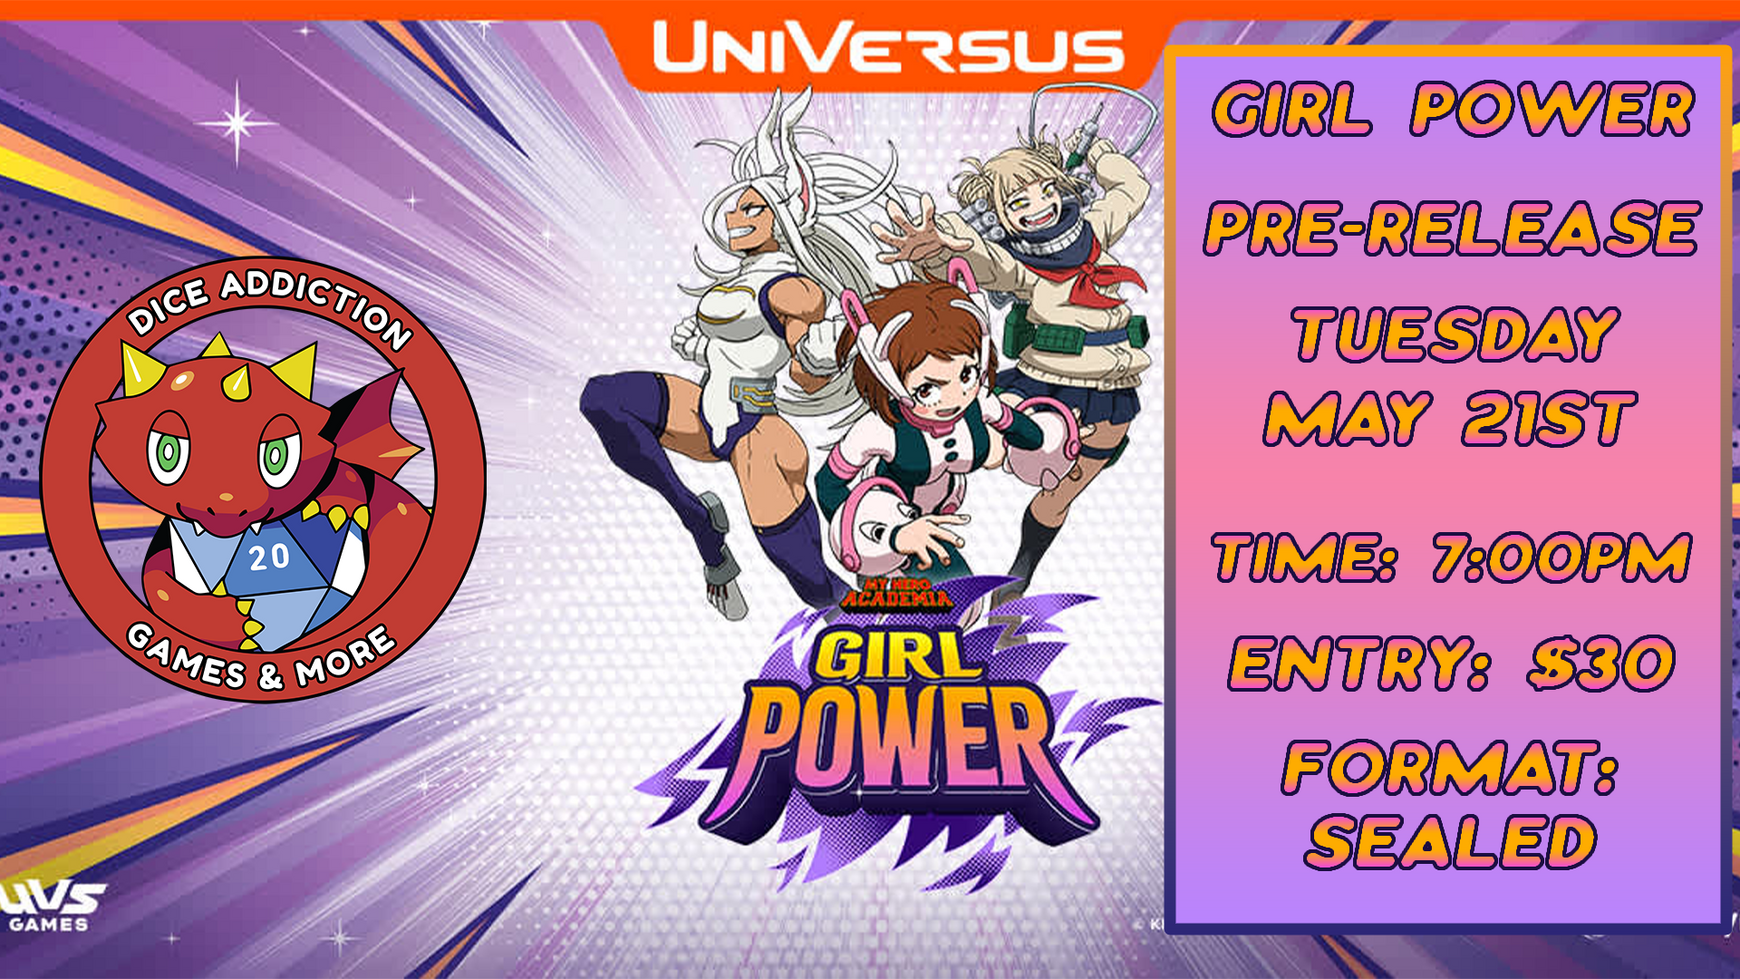 My Hero Academia: Girl Power Pre-release at Dice Addiction Reminder